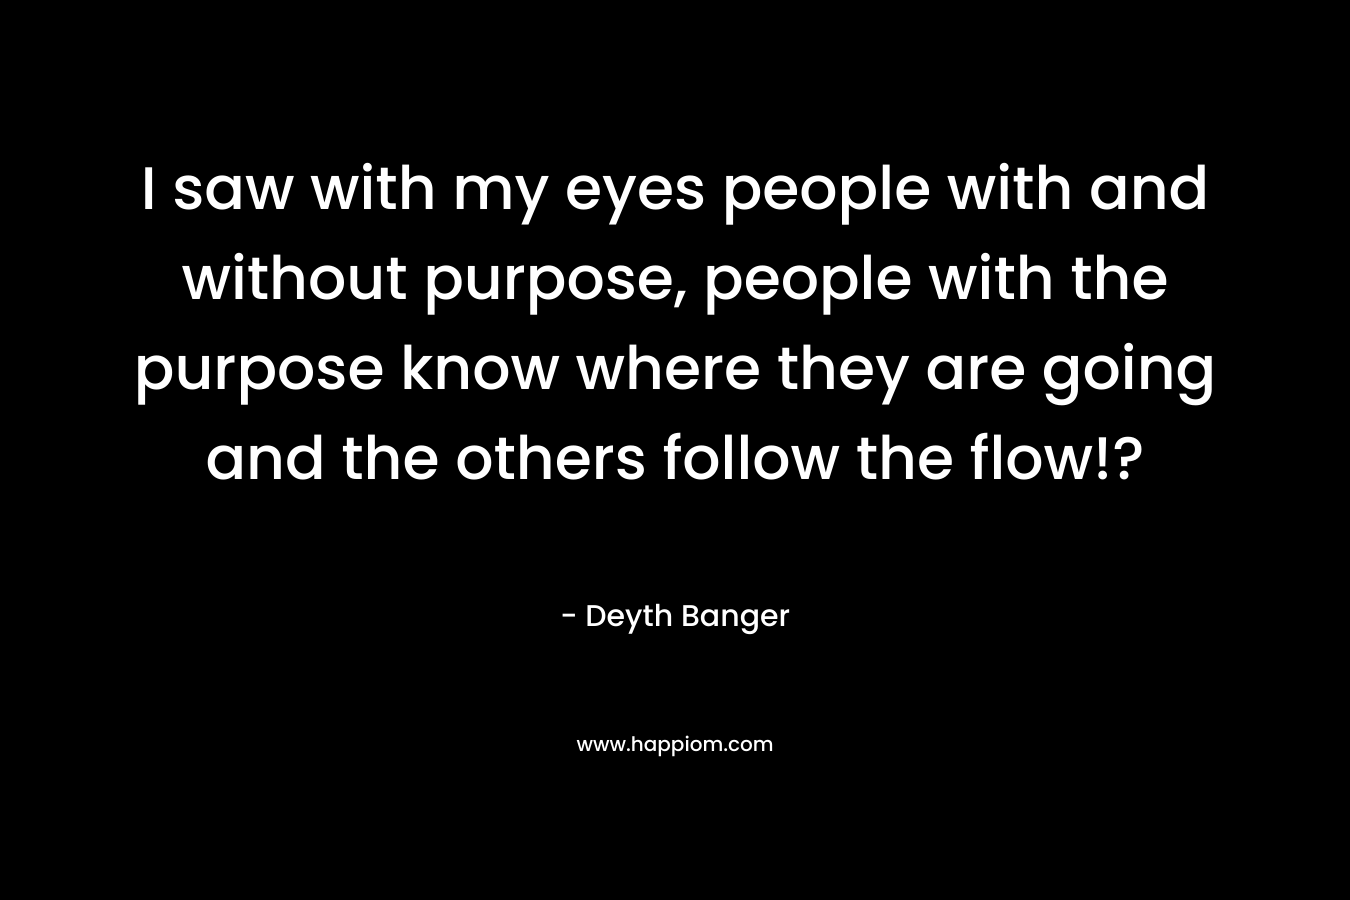 I saw with my eyes people with and without purpose, people with the purpose know where they are going and the others follow the flow!? – Deyth Banger